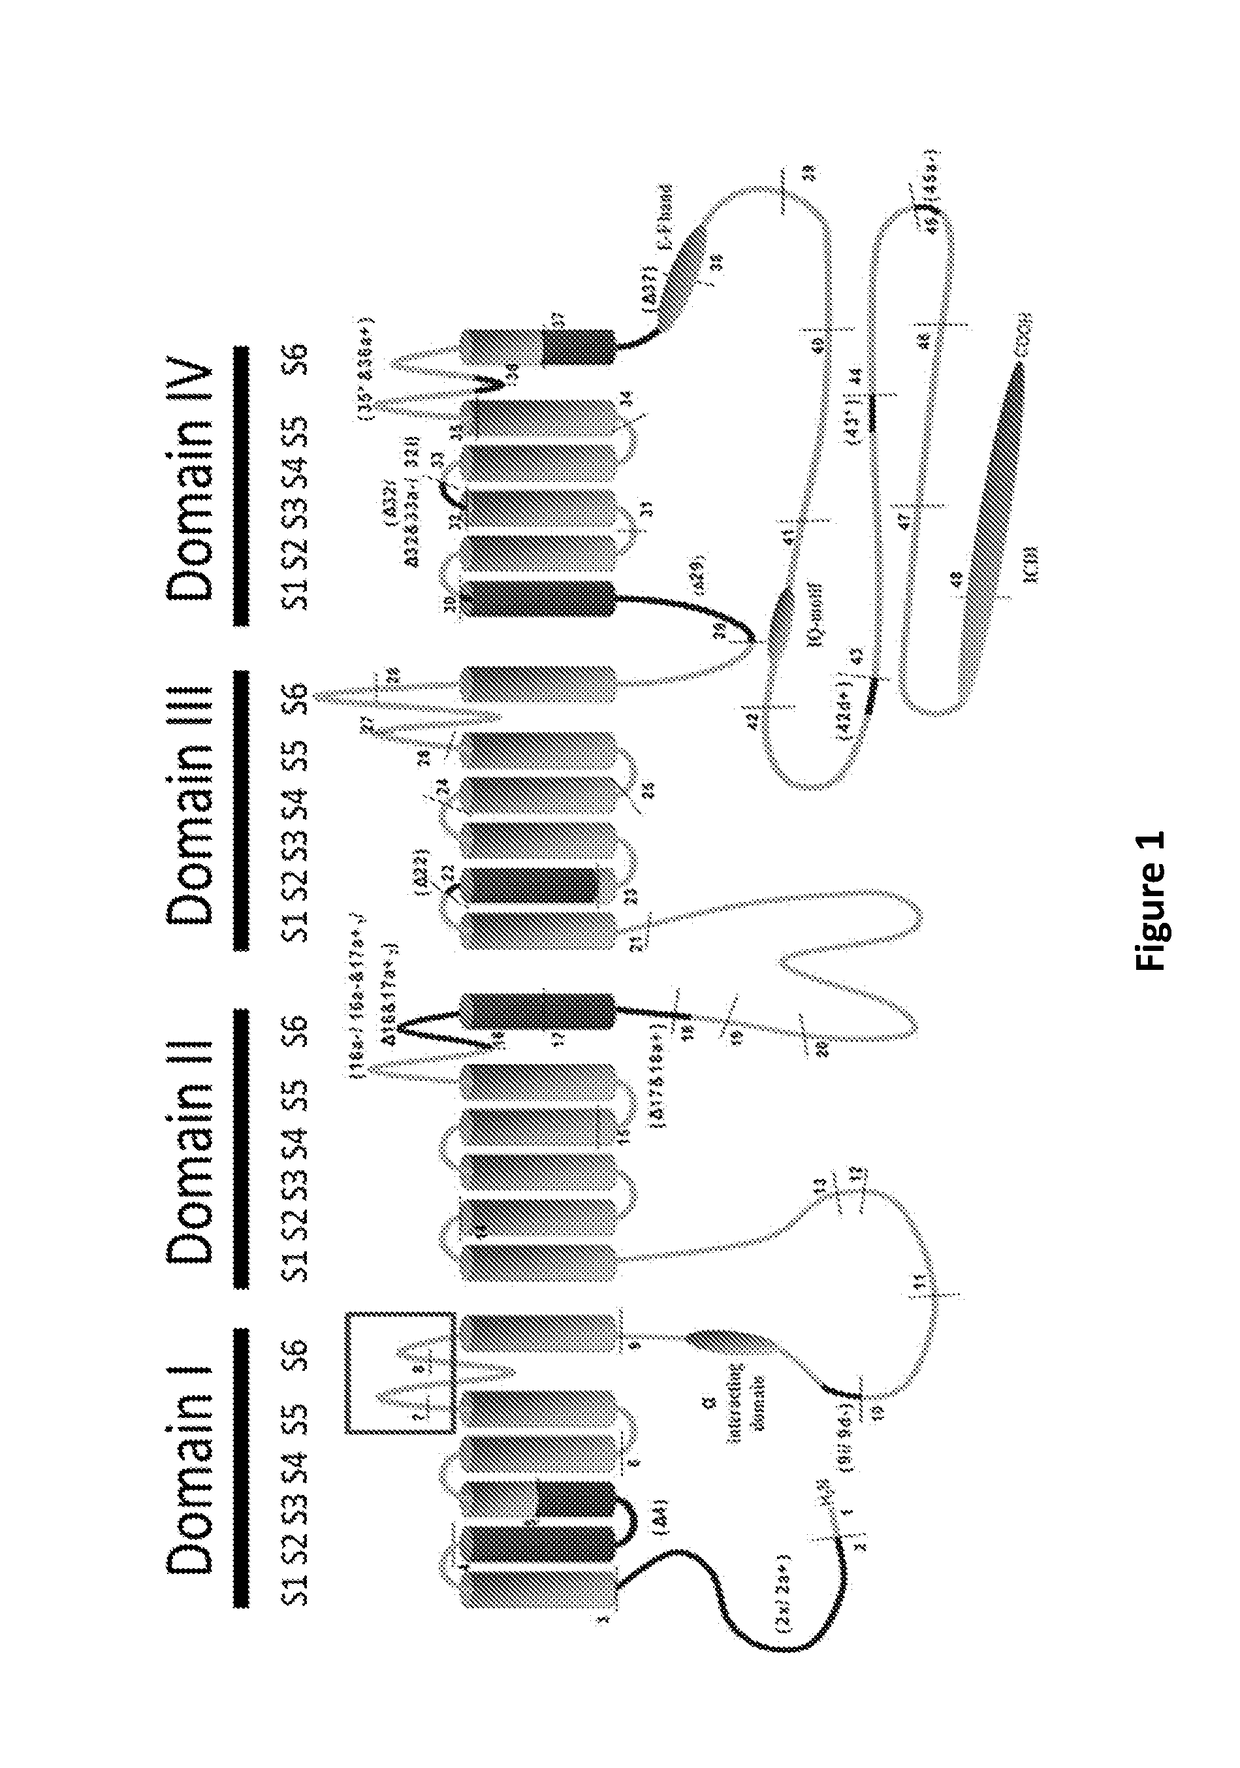 Antibodies to l-type voltage gated channels and related methods